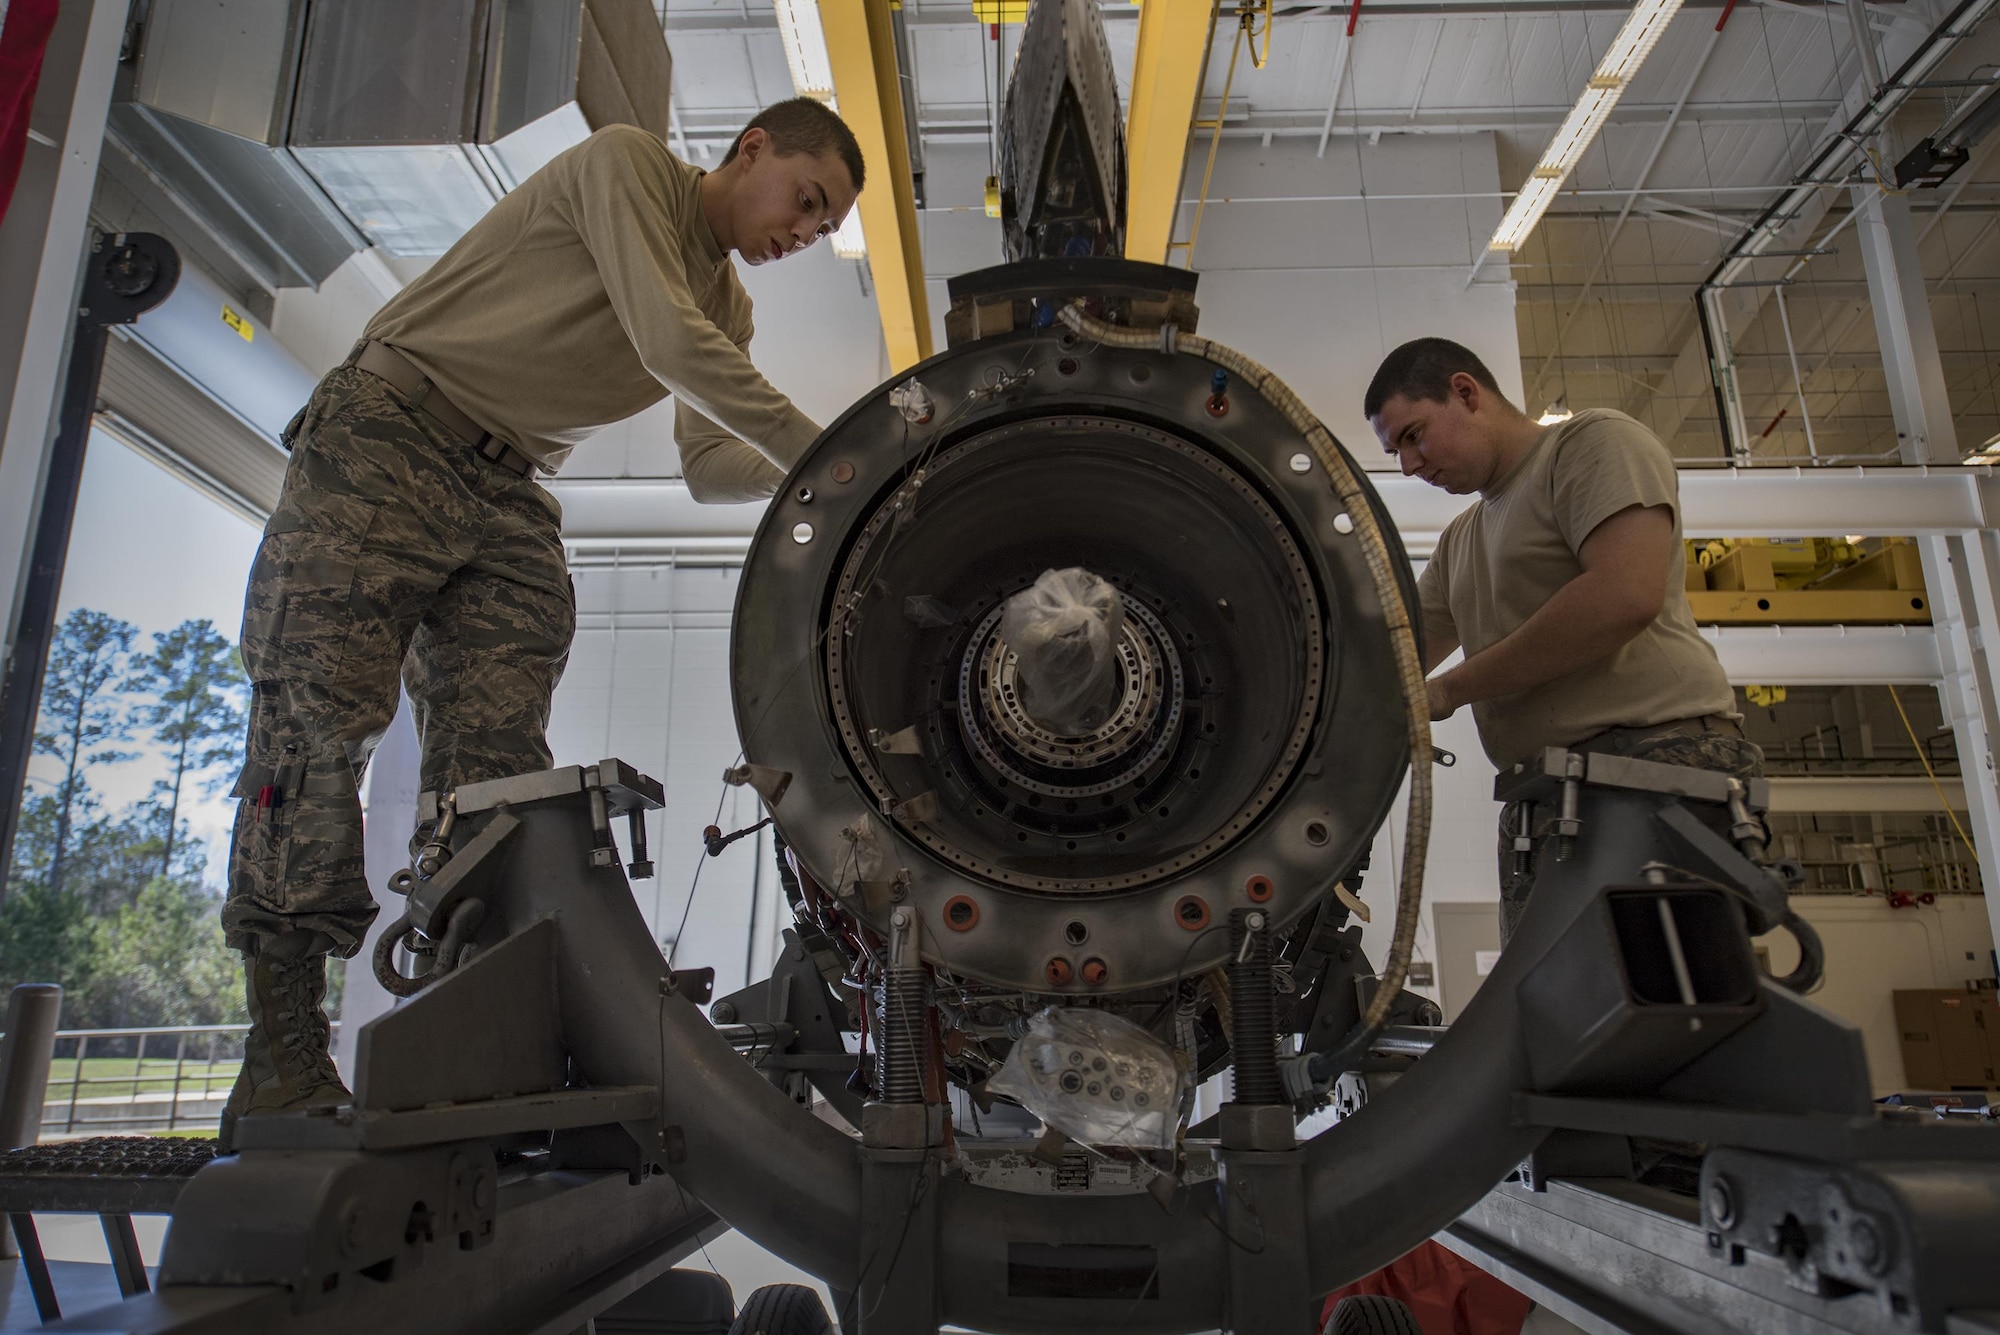 Both 23d Component Maintenance Squadron propulsion technicians, Airman 1st Class Anthony Guevara, left, and Airman 1st Class Jesse Mendheim, disassemble a TF-34 engine used in A-10C Thunderbolt lls, Jan. 25, 2017, at Moody Air Force Base, Ga. Airmen pay close attention to detail while systematically breaking the engine down. (U.S. Air Force photo by Airman 1st Class Daniel Snider)